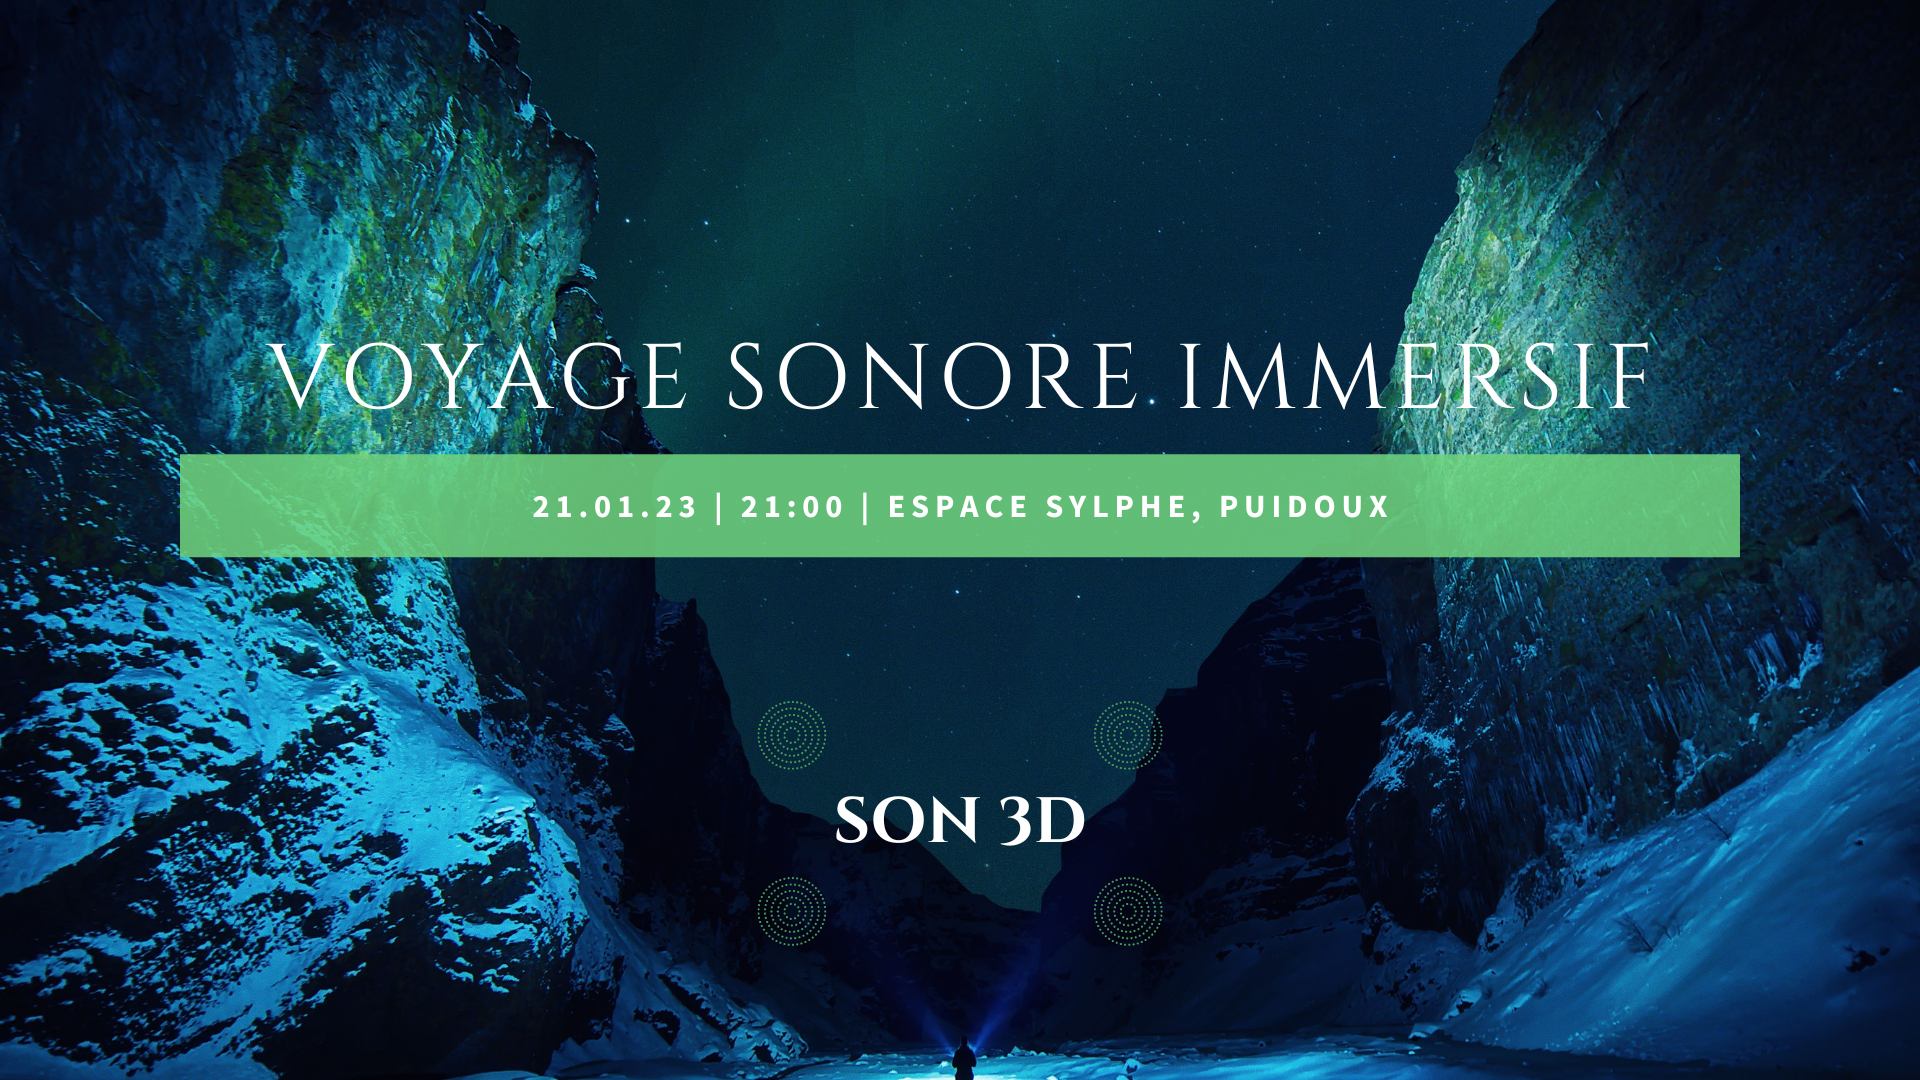 Voyage sonore immersif à Puidoux